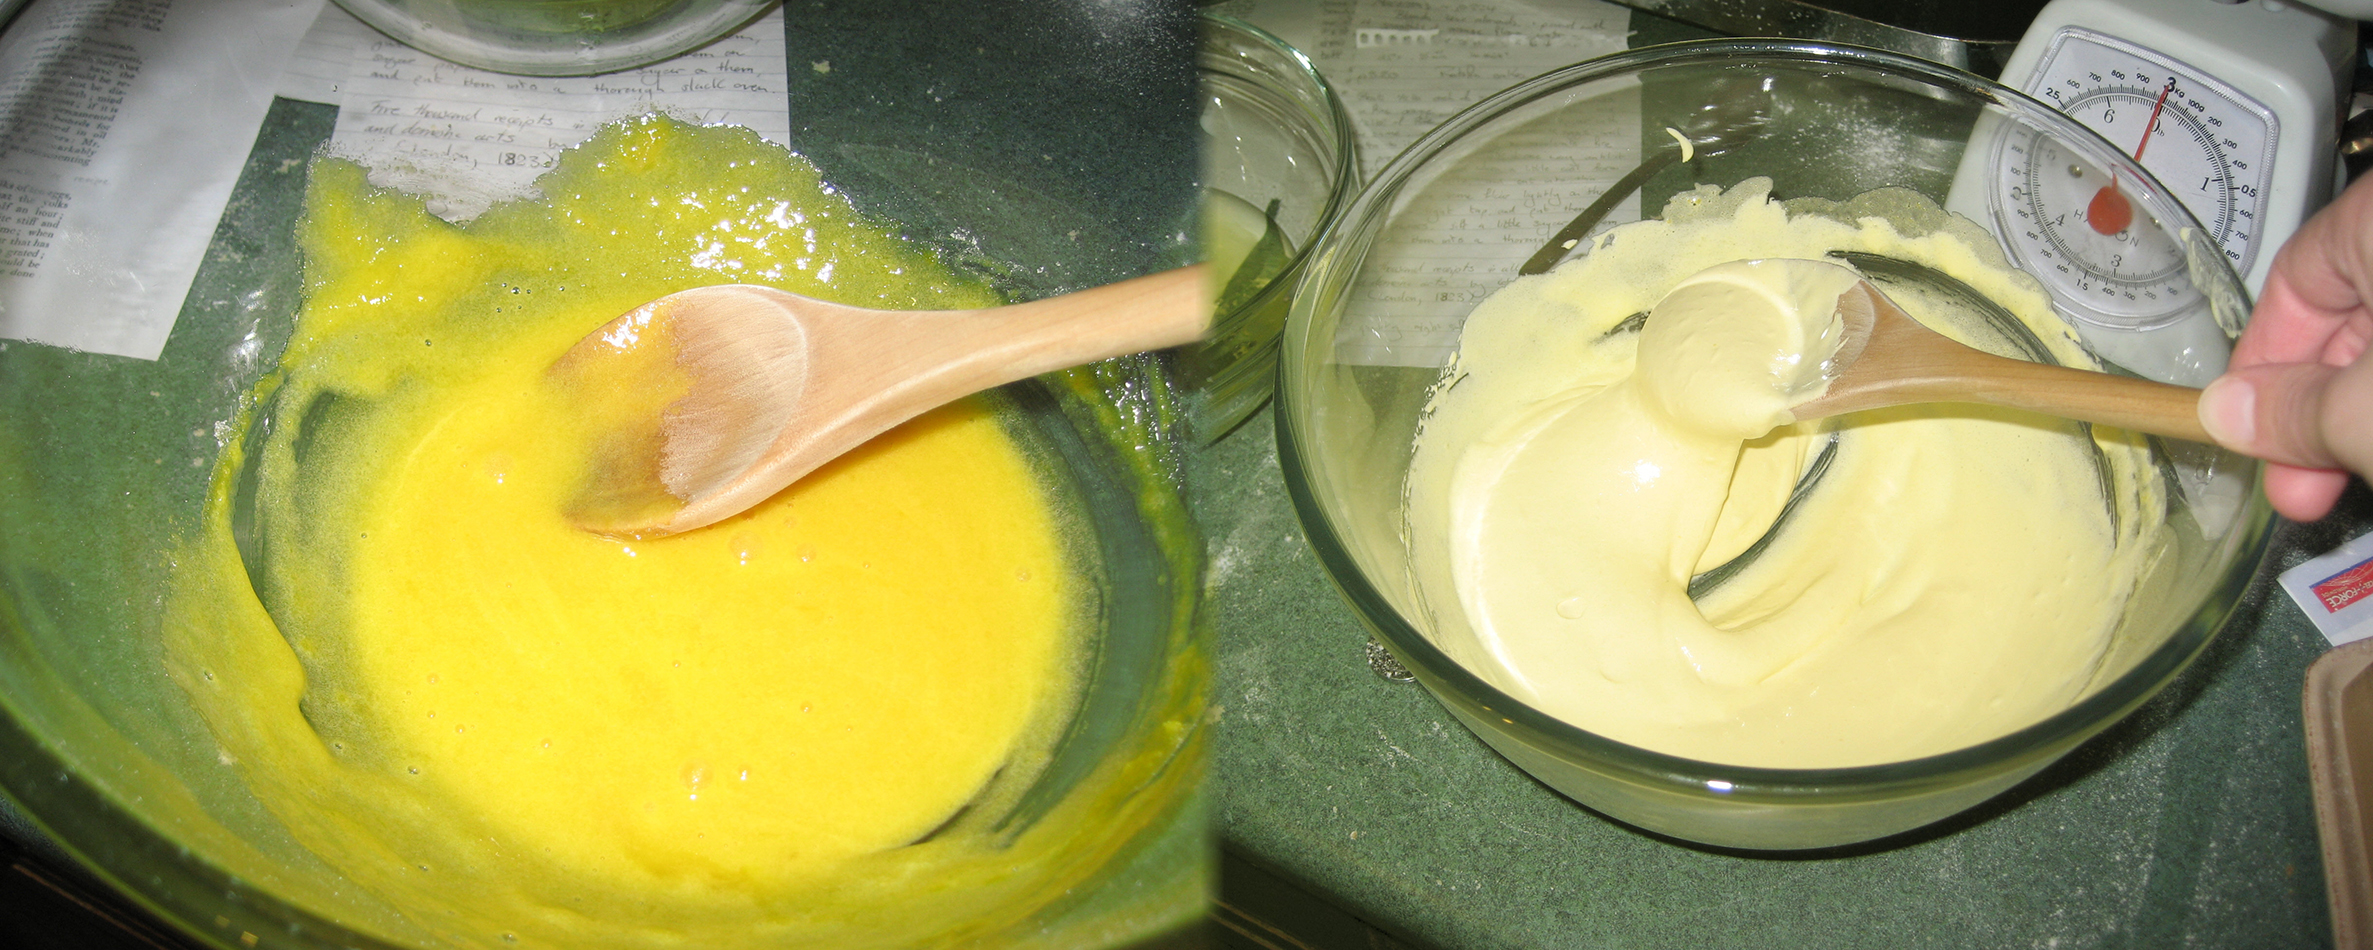 The mixture of egg yolks and sugar before beating (on the left) and after beating for half an hour (on the right).